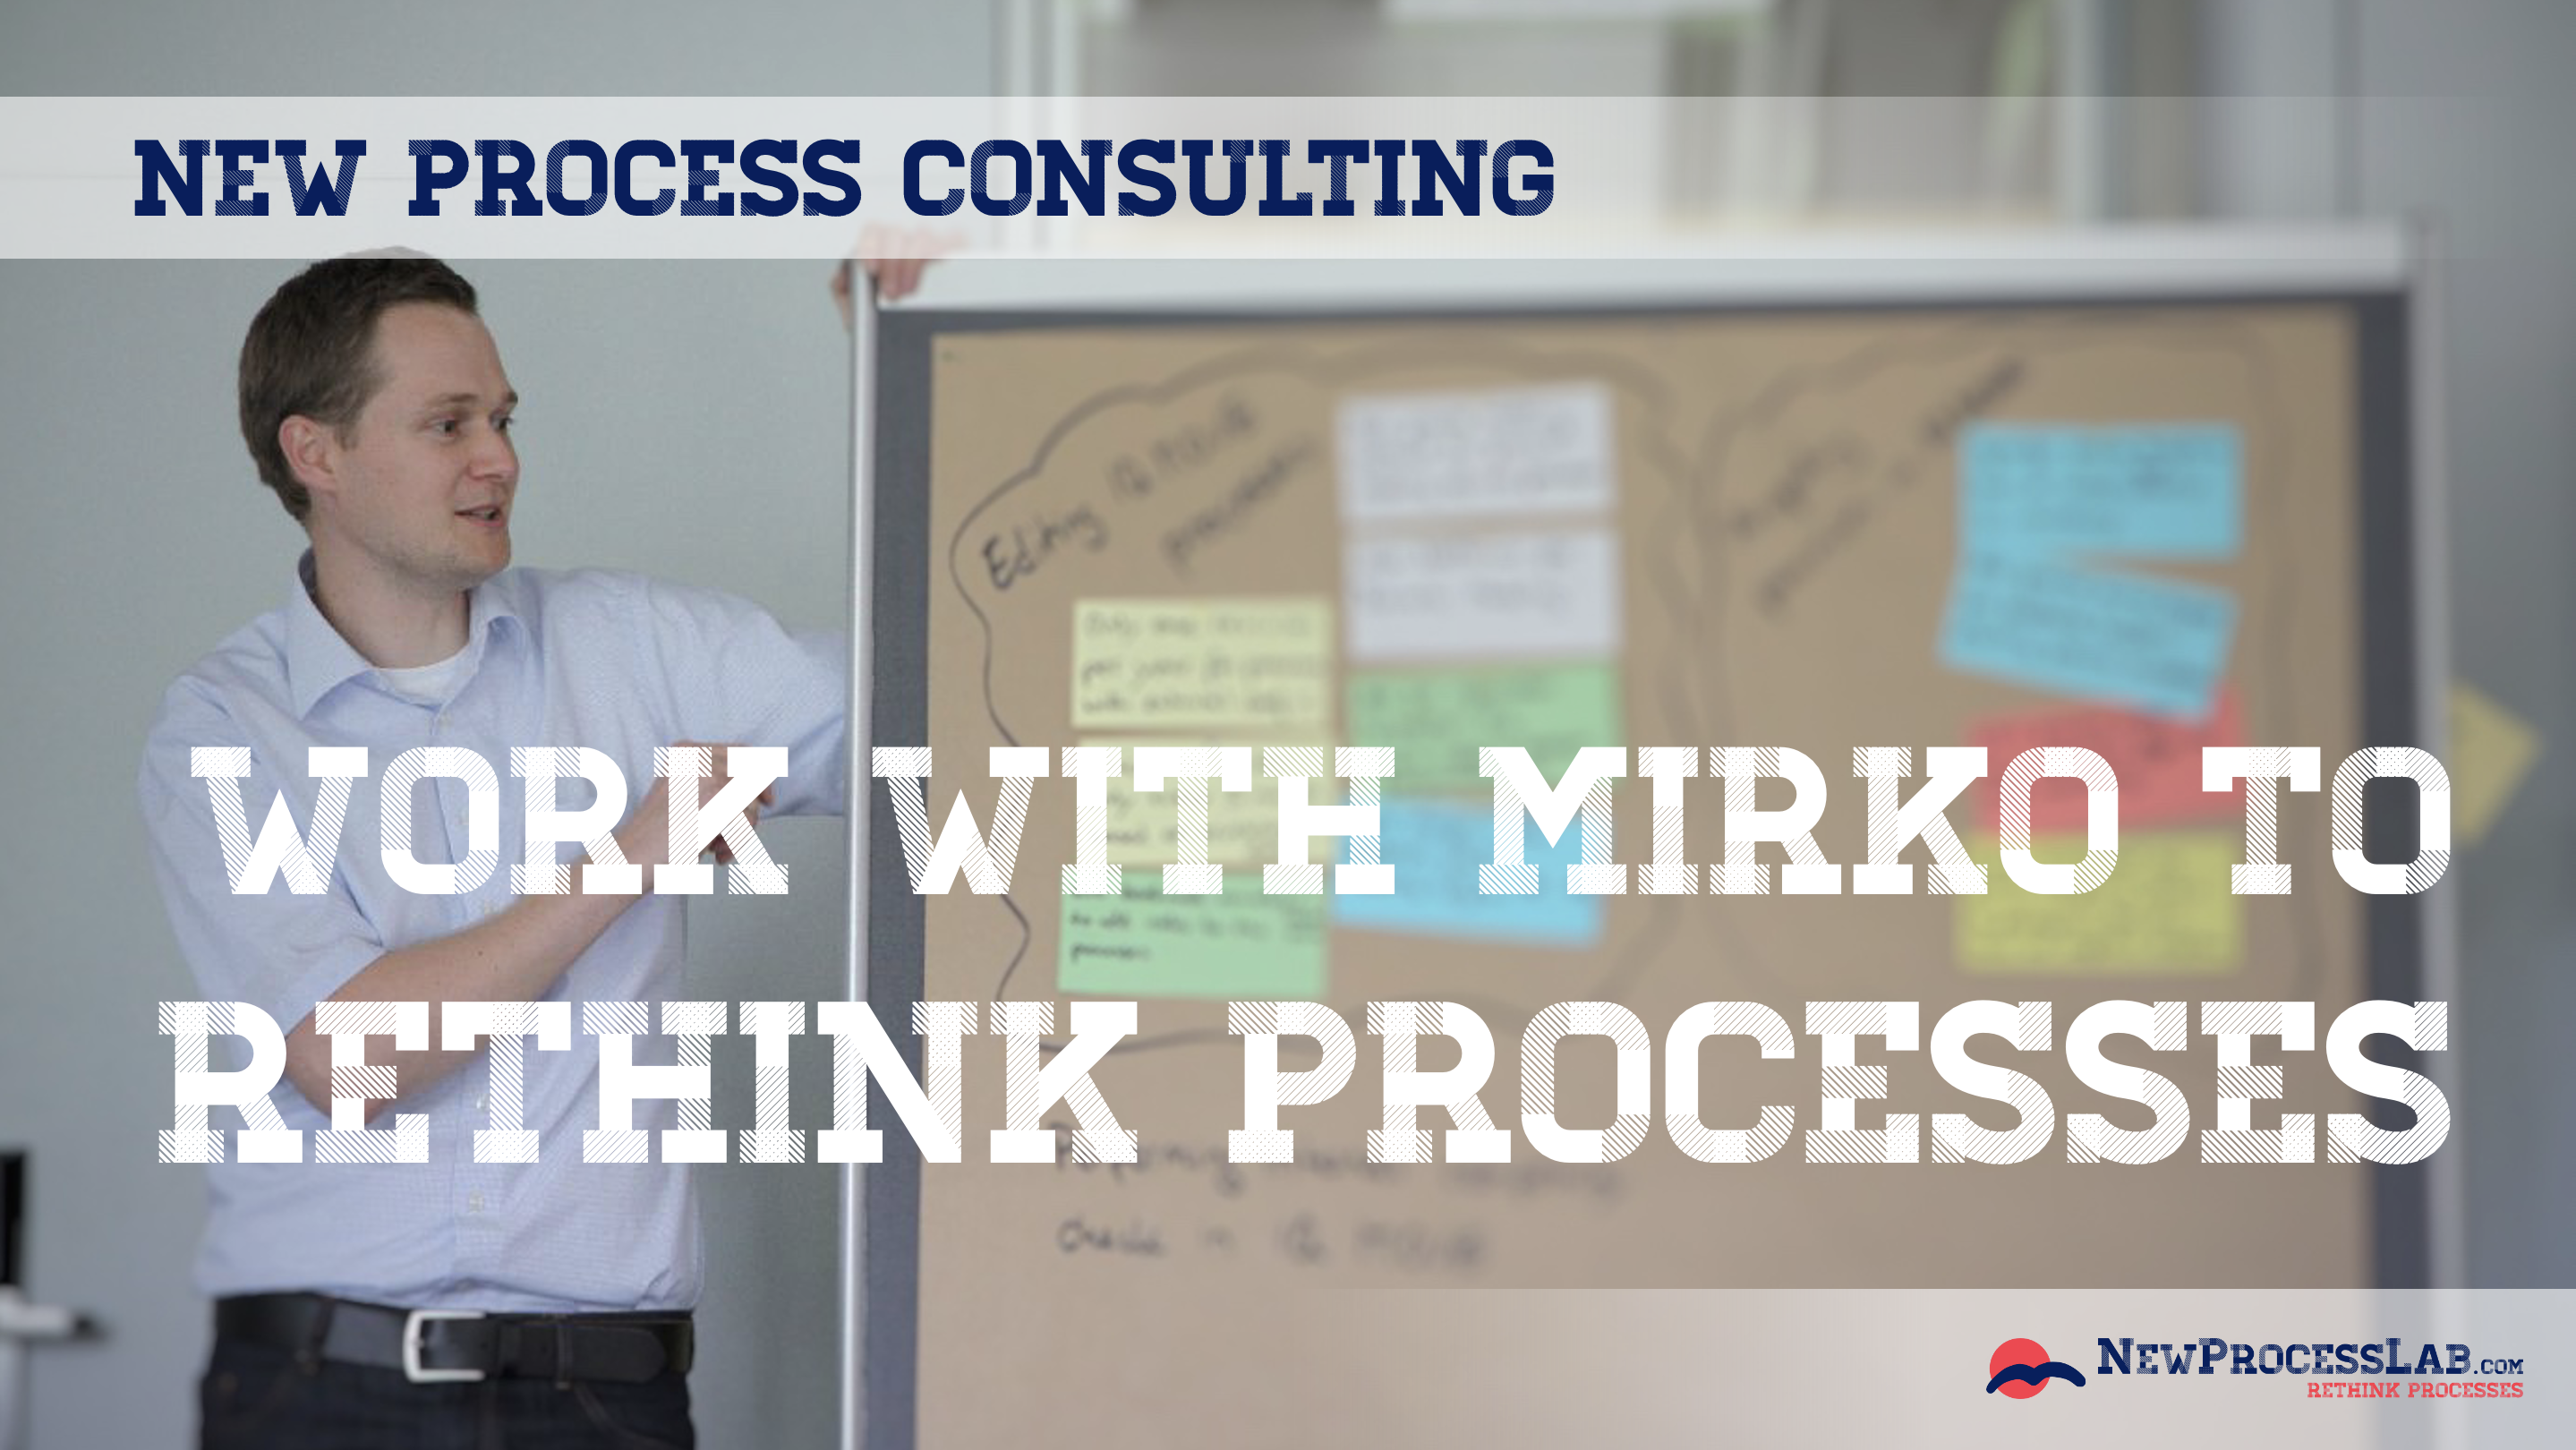 New Process Consulting